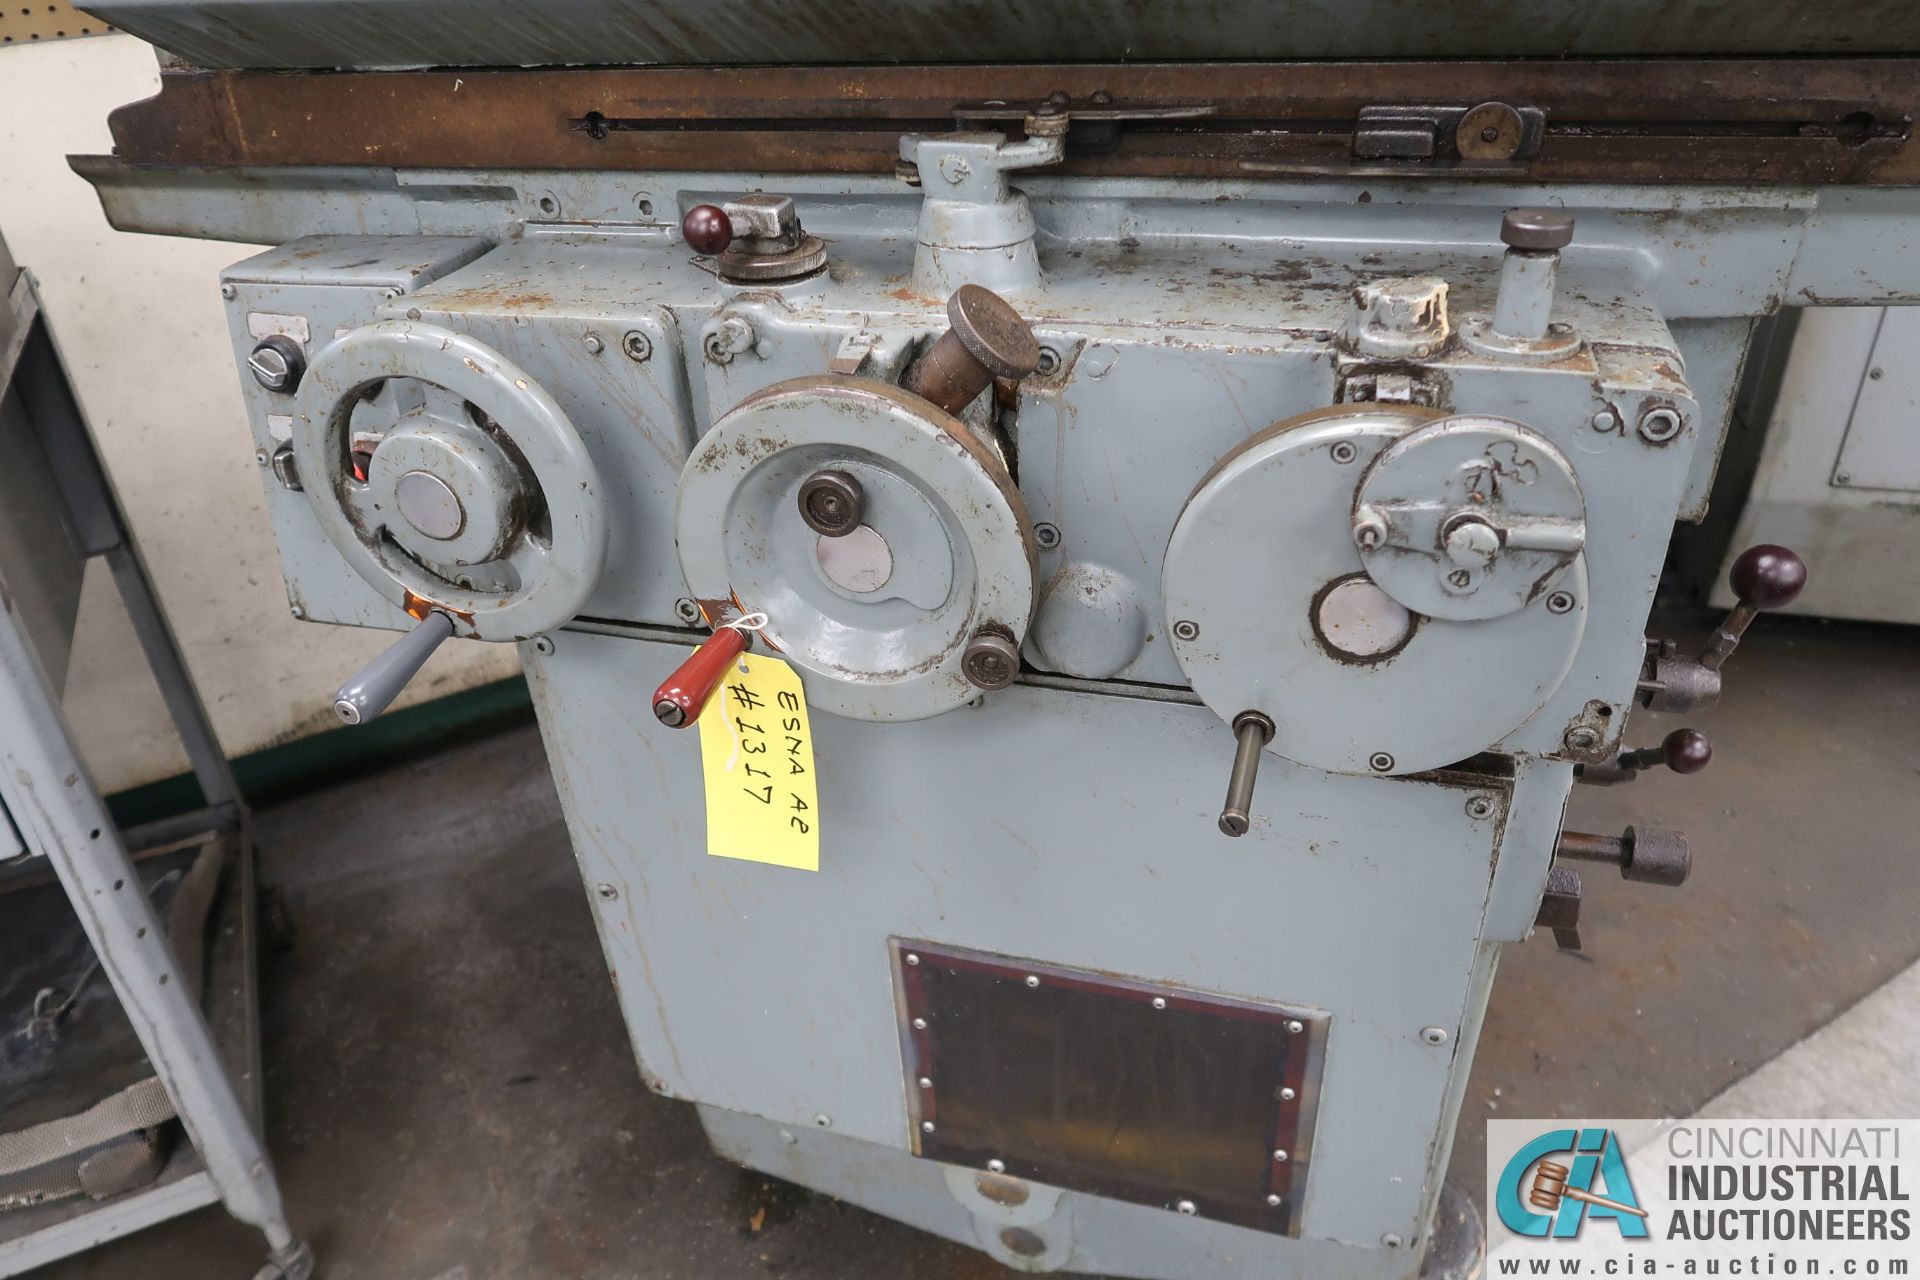 6" X 18" BROWN & SHARPE 618 MICROMASTER SURFACE GRINDER - Loading fee due - Image 3 of 3